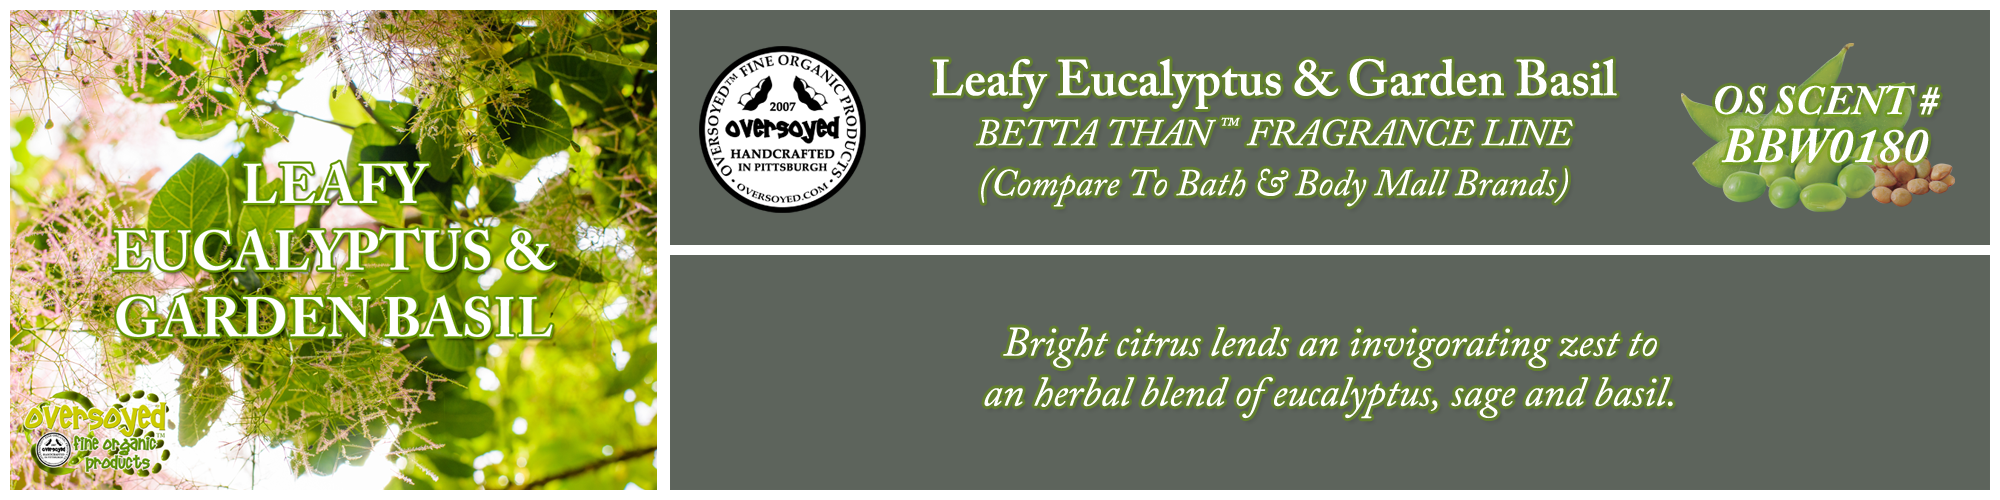 Leafy Eucalyptus & Garden Basil Handcrafted Products Collection